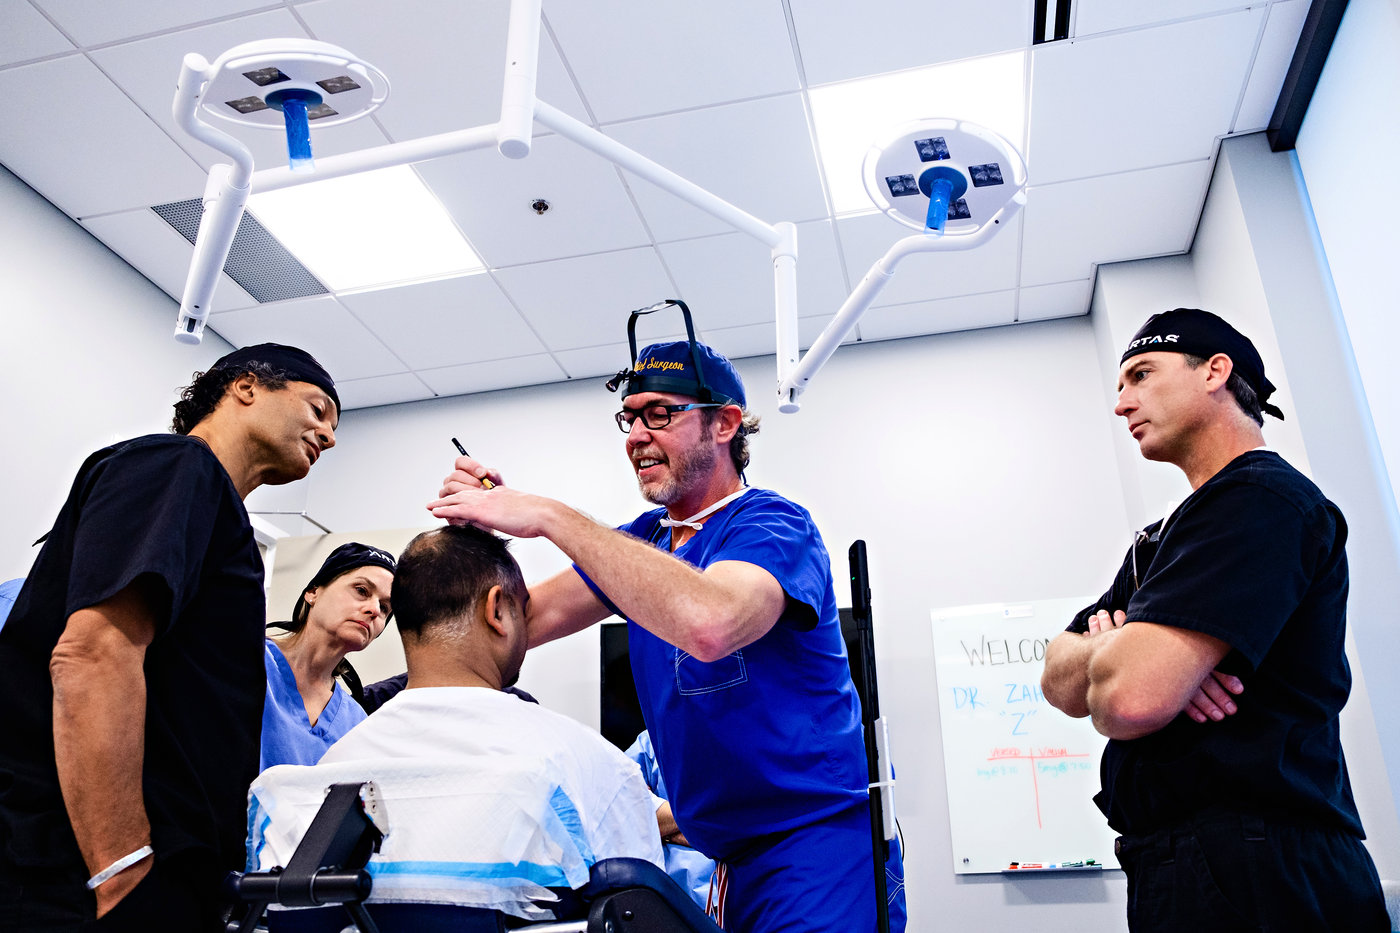 Dr. Ken Anderson teaches a Masters’ Class at the American Academy of Hair Restoration Surgery (AAHRS) in Alpharetta, GA in 2019.